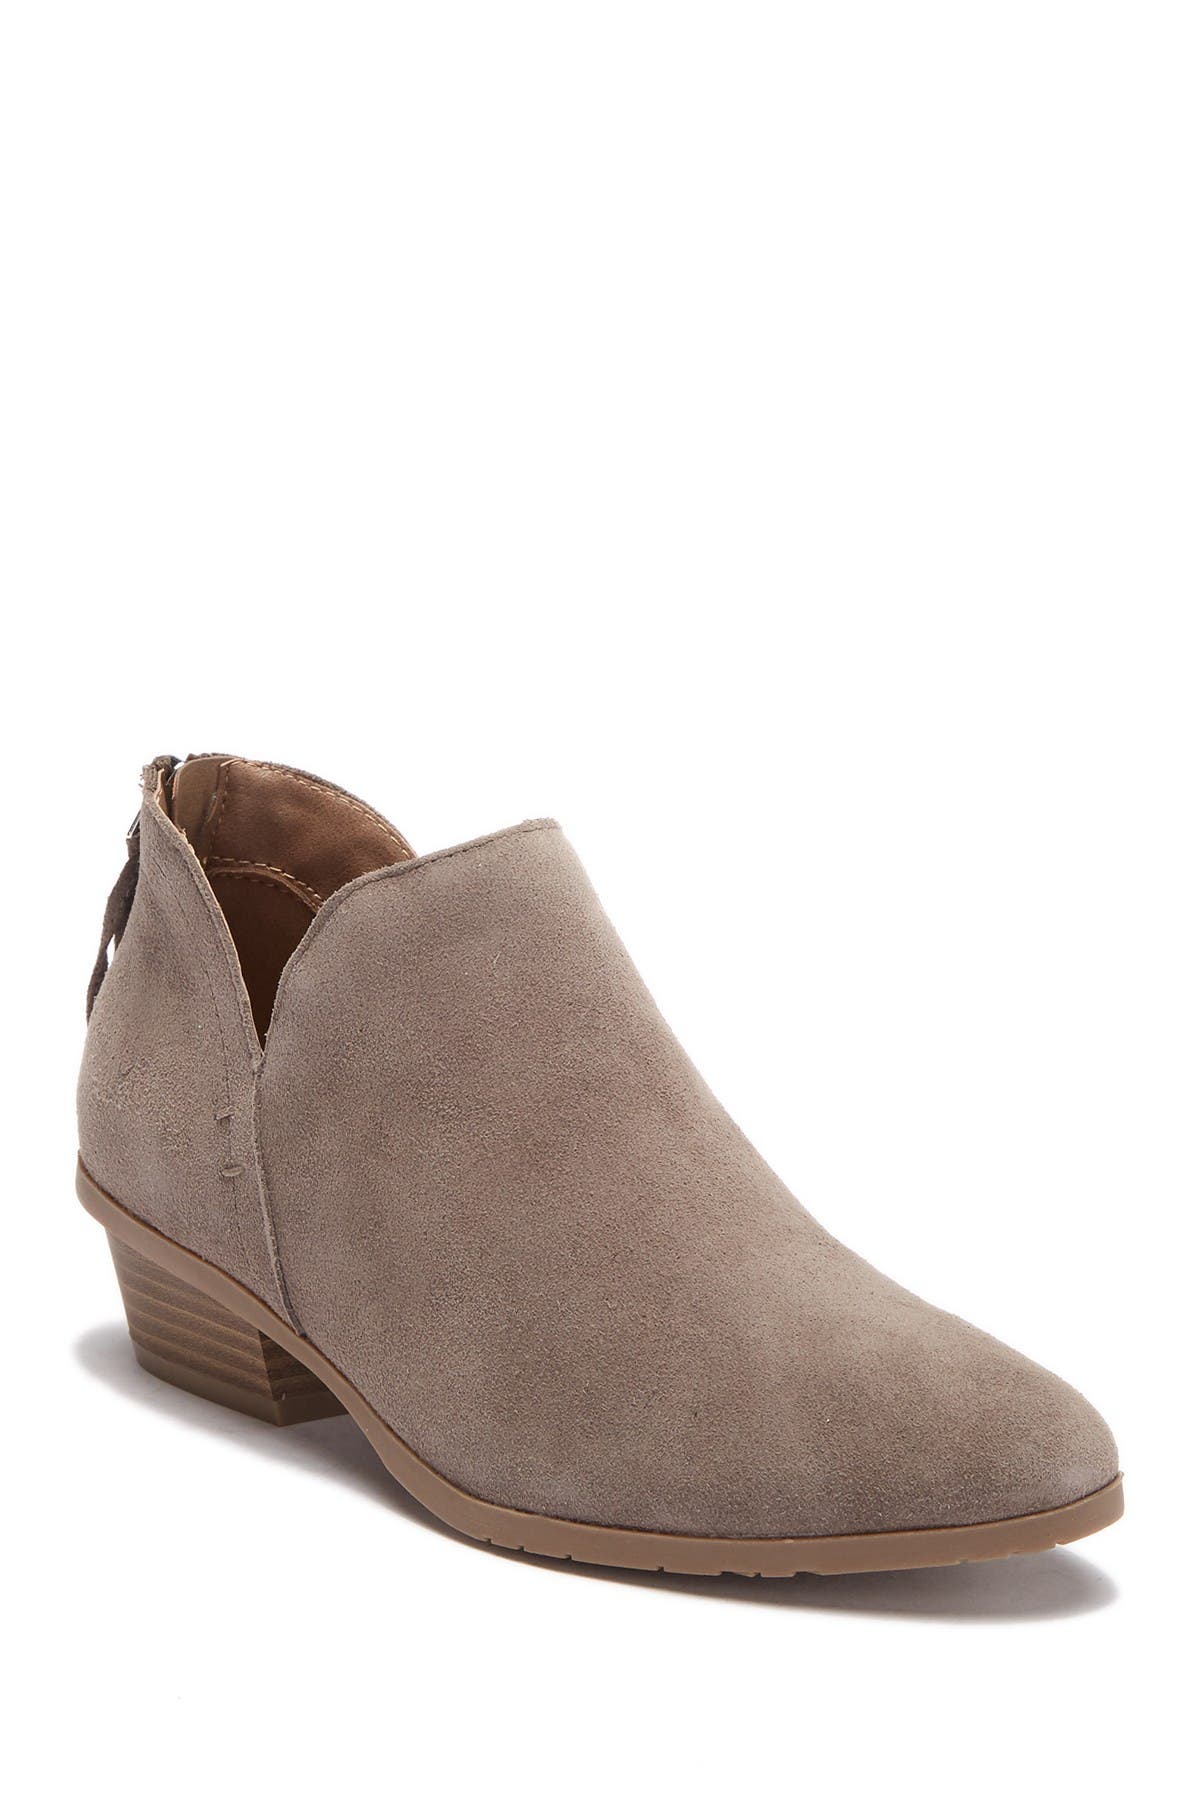 kenneth cole reaction ankle boots